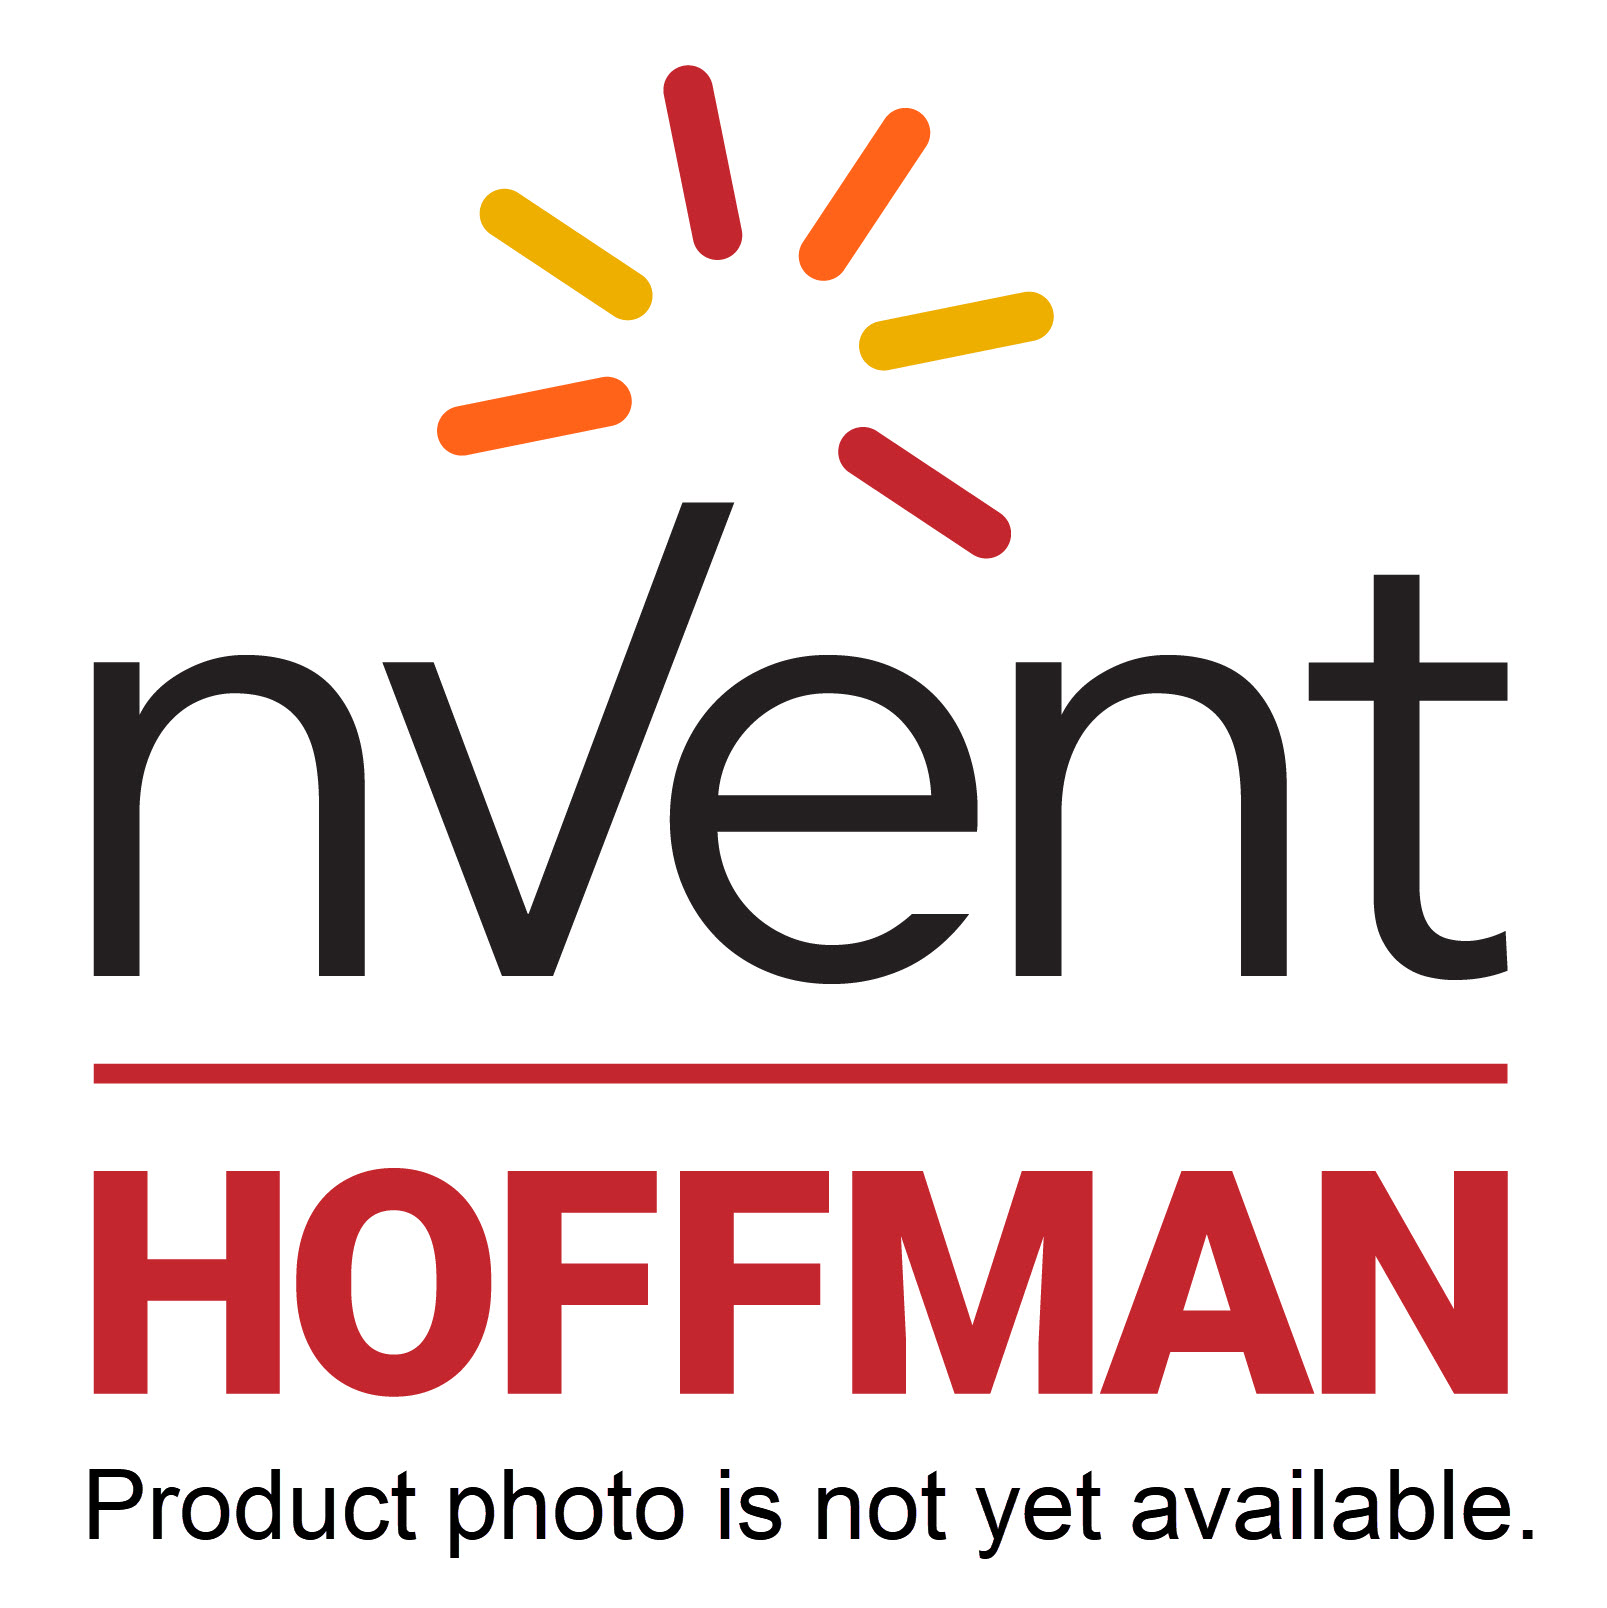 nVent-Hoffman-Photo-Not-Available